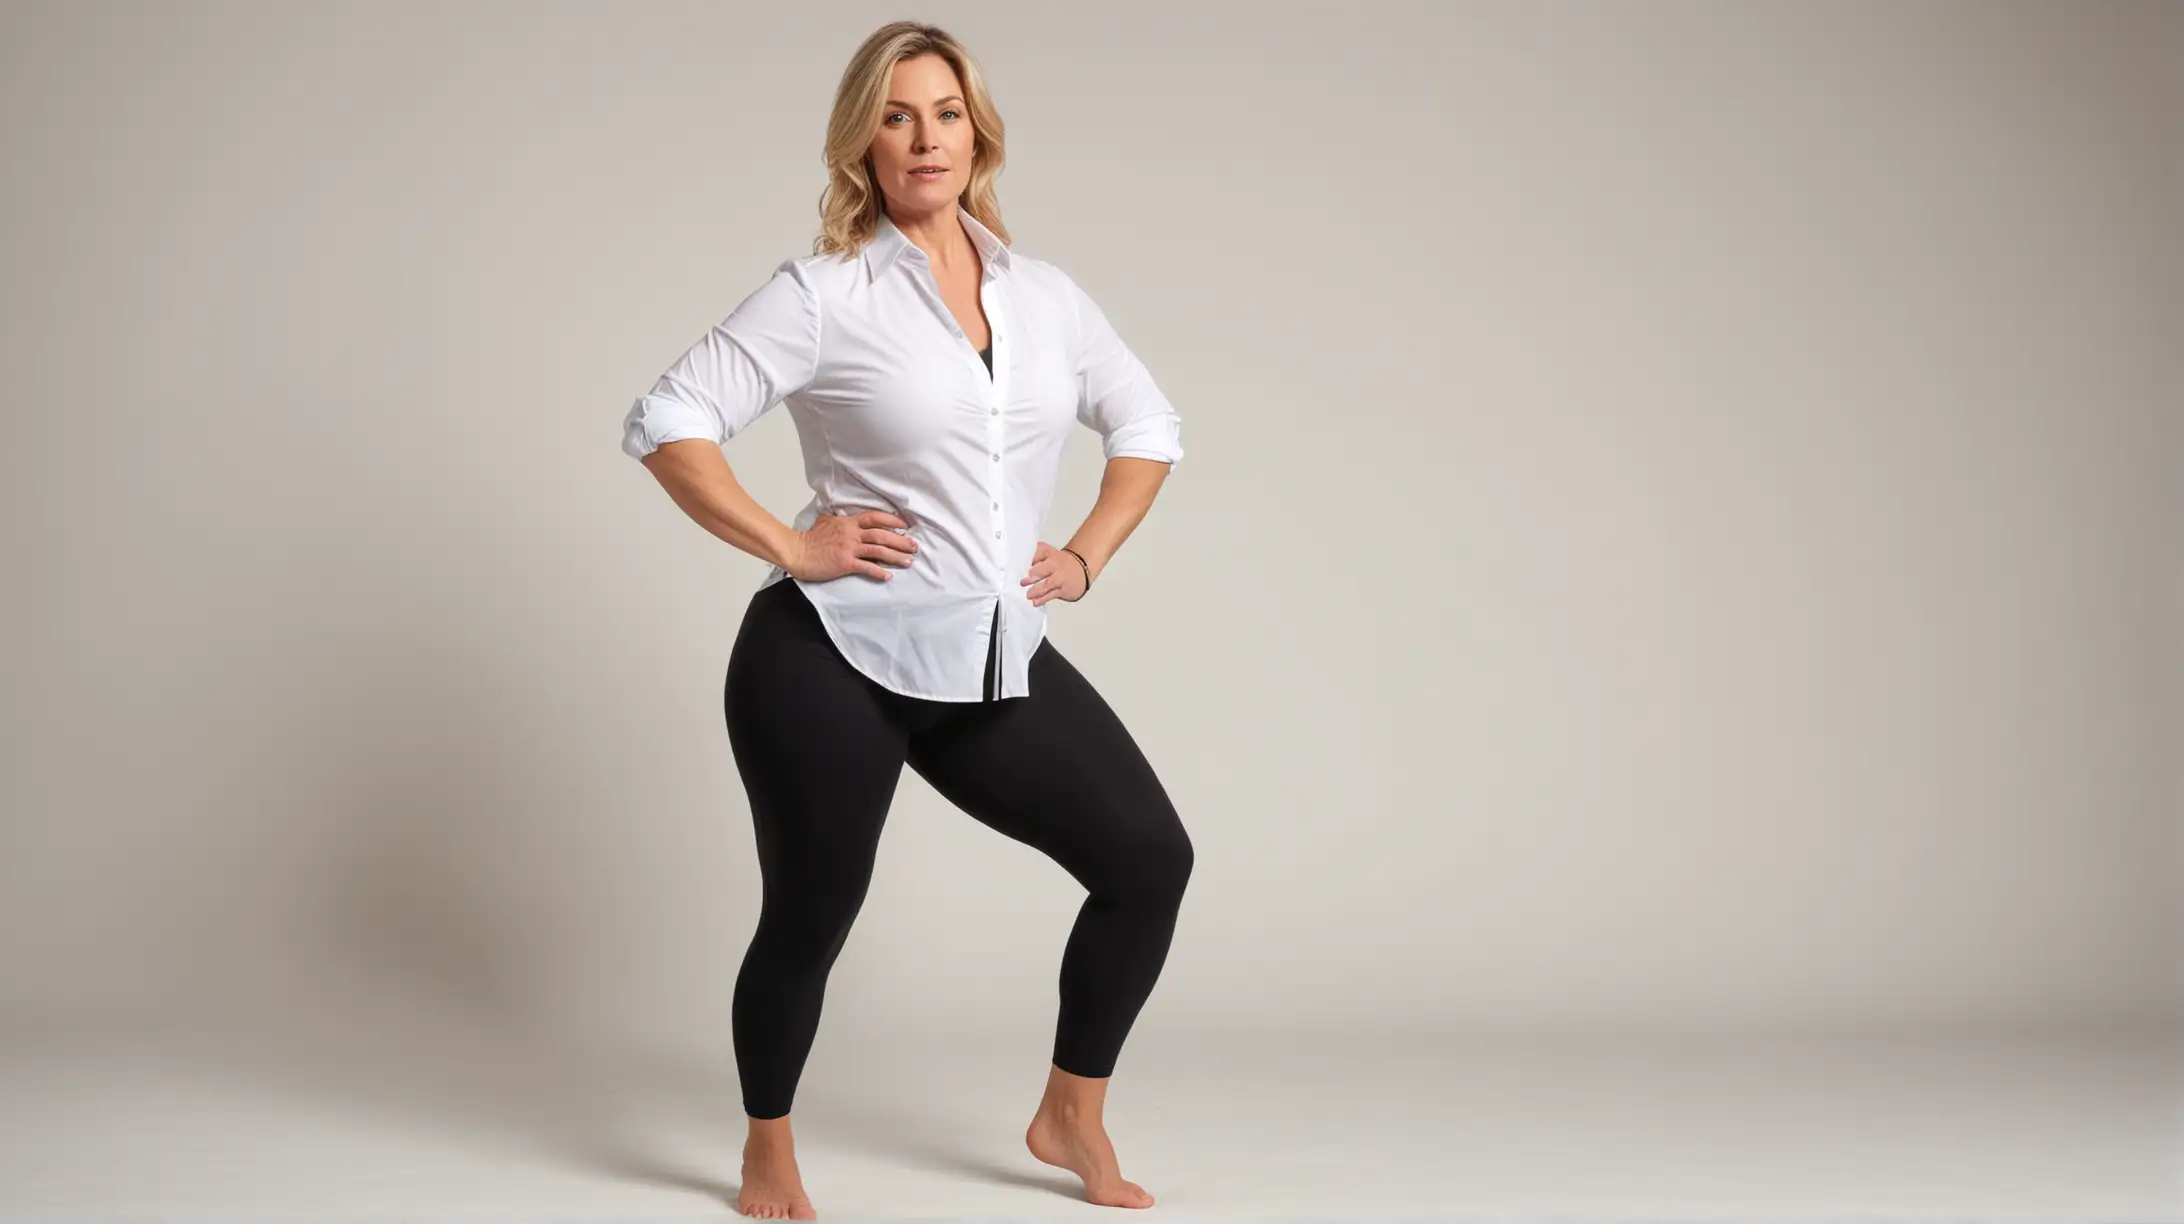 Mature, Curvy, Blonde Woman, untucked white stretch button down shirt, full black tights, no shoes, hands on hips, exercising, squatting down from standing position.